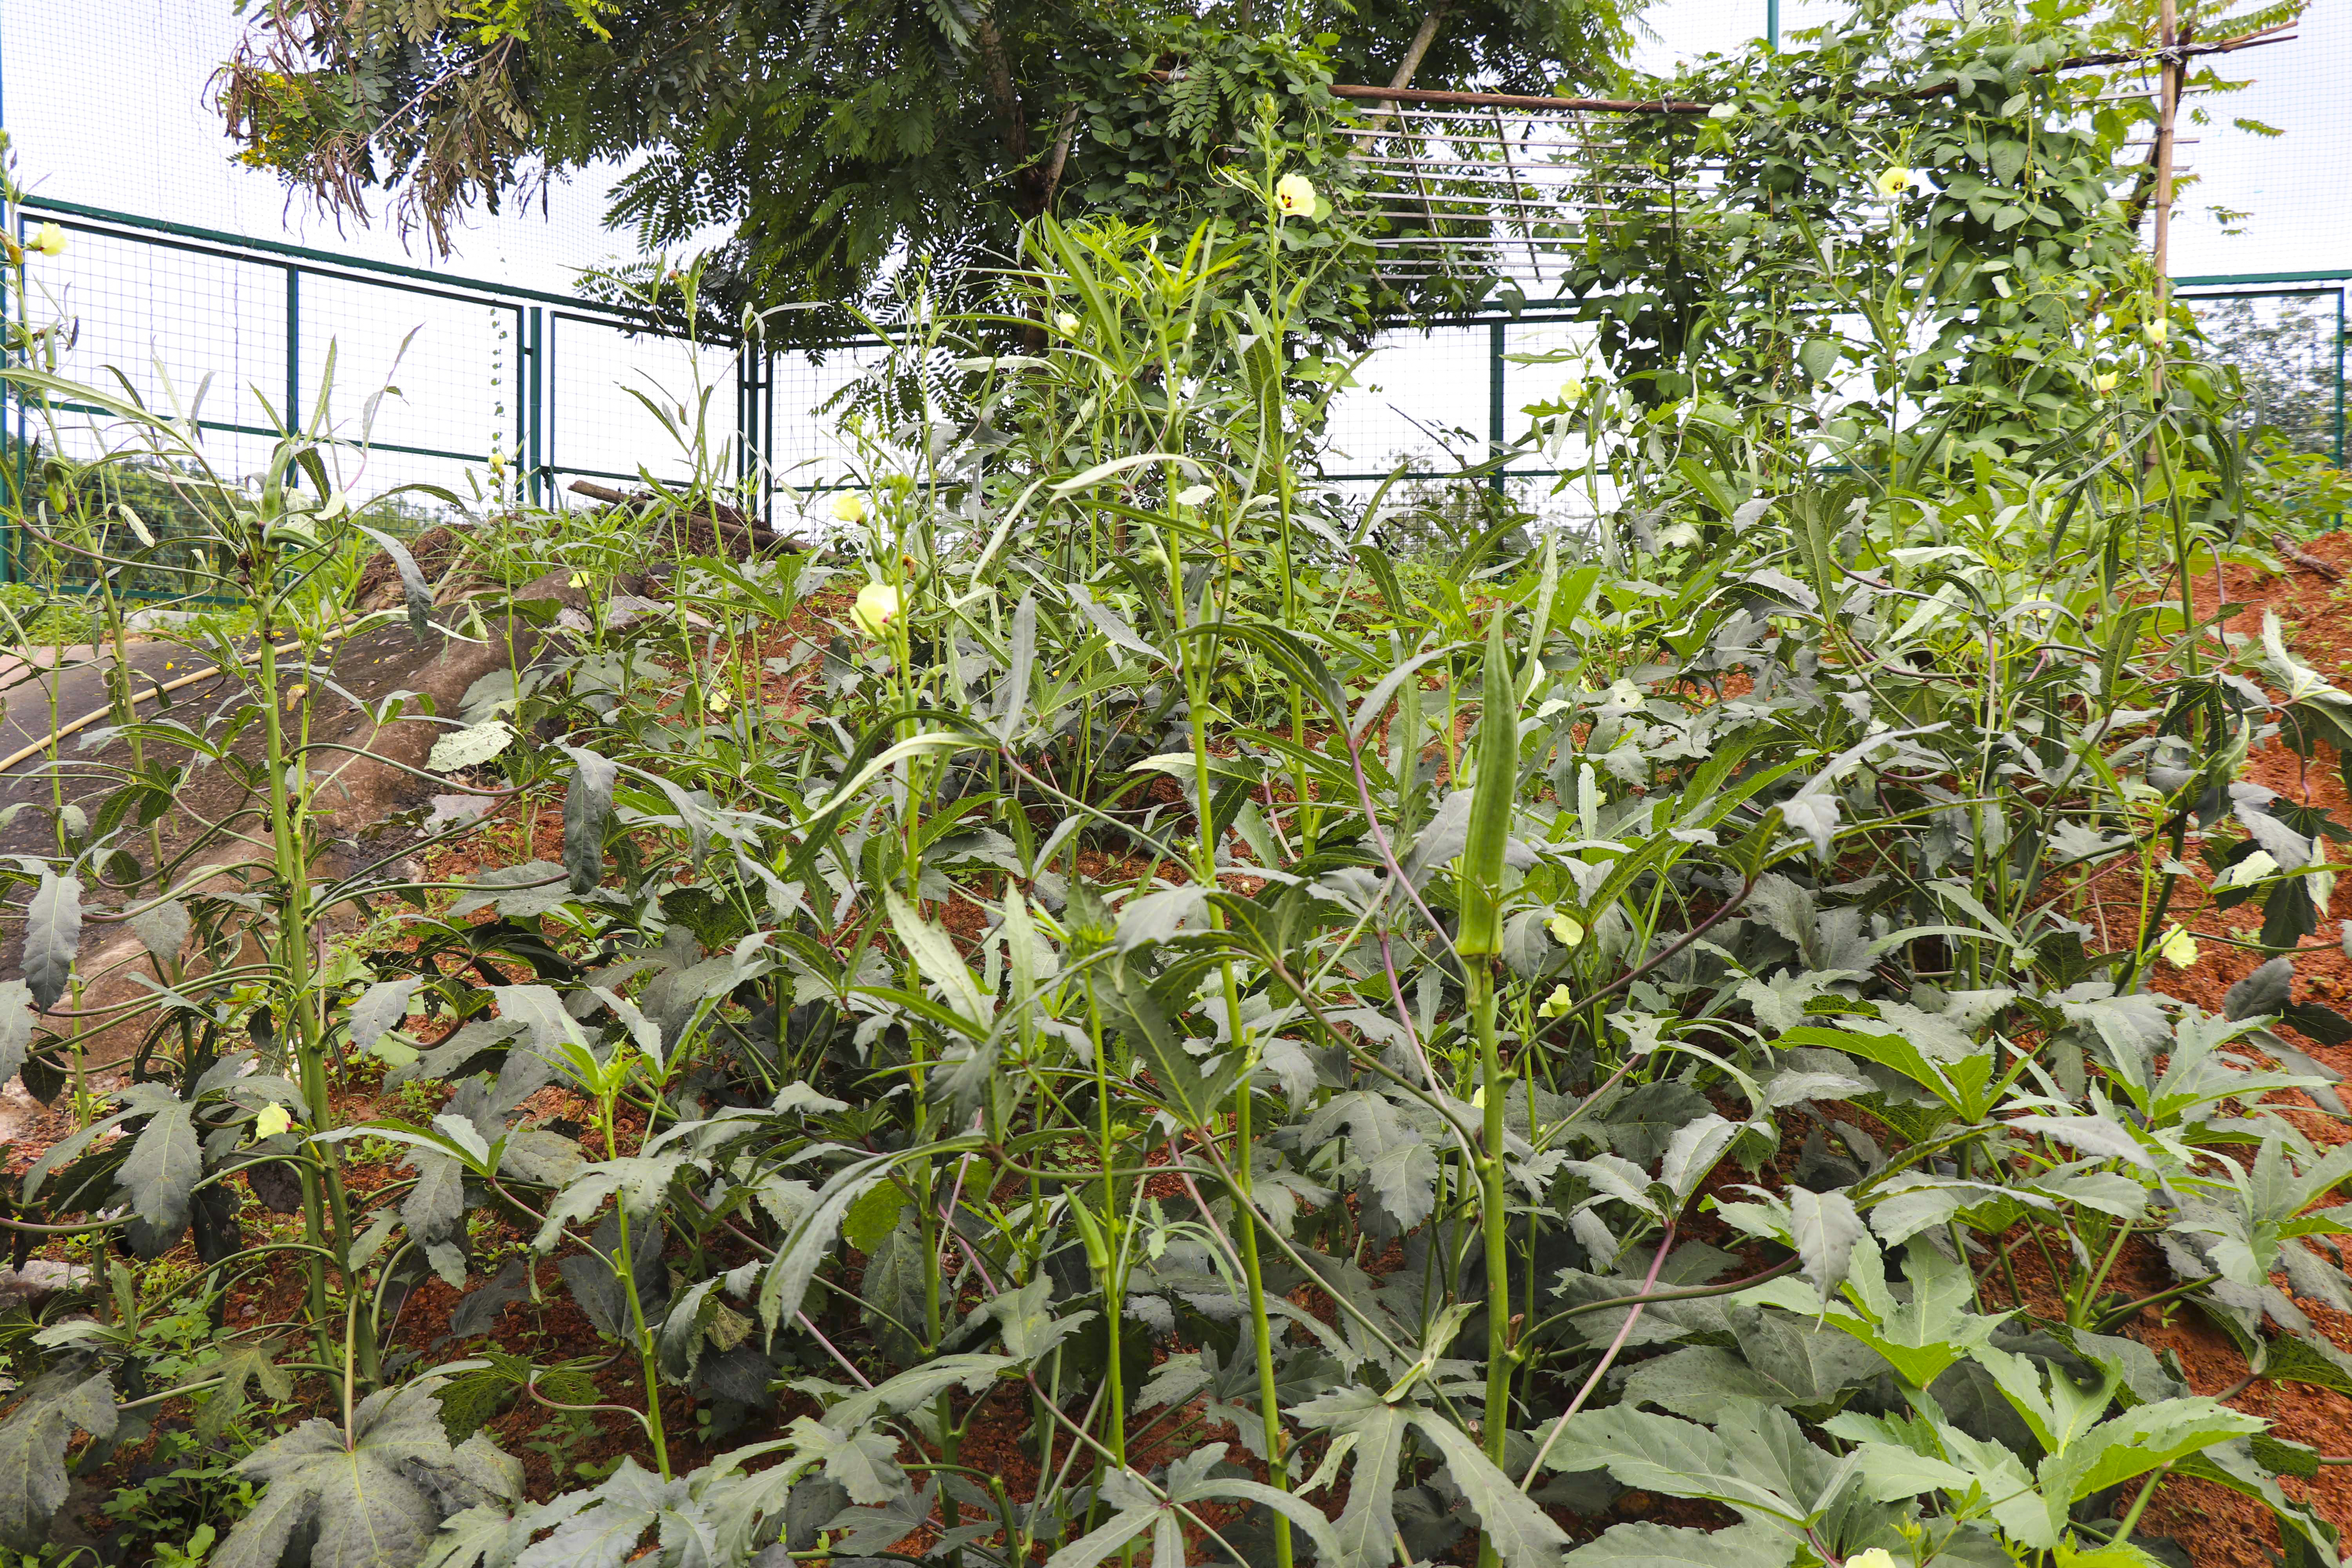 Vegetable Cultivation